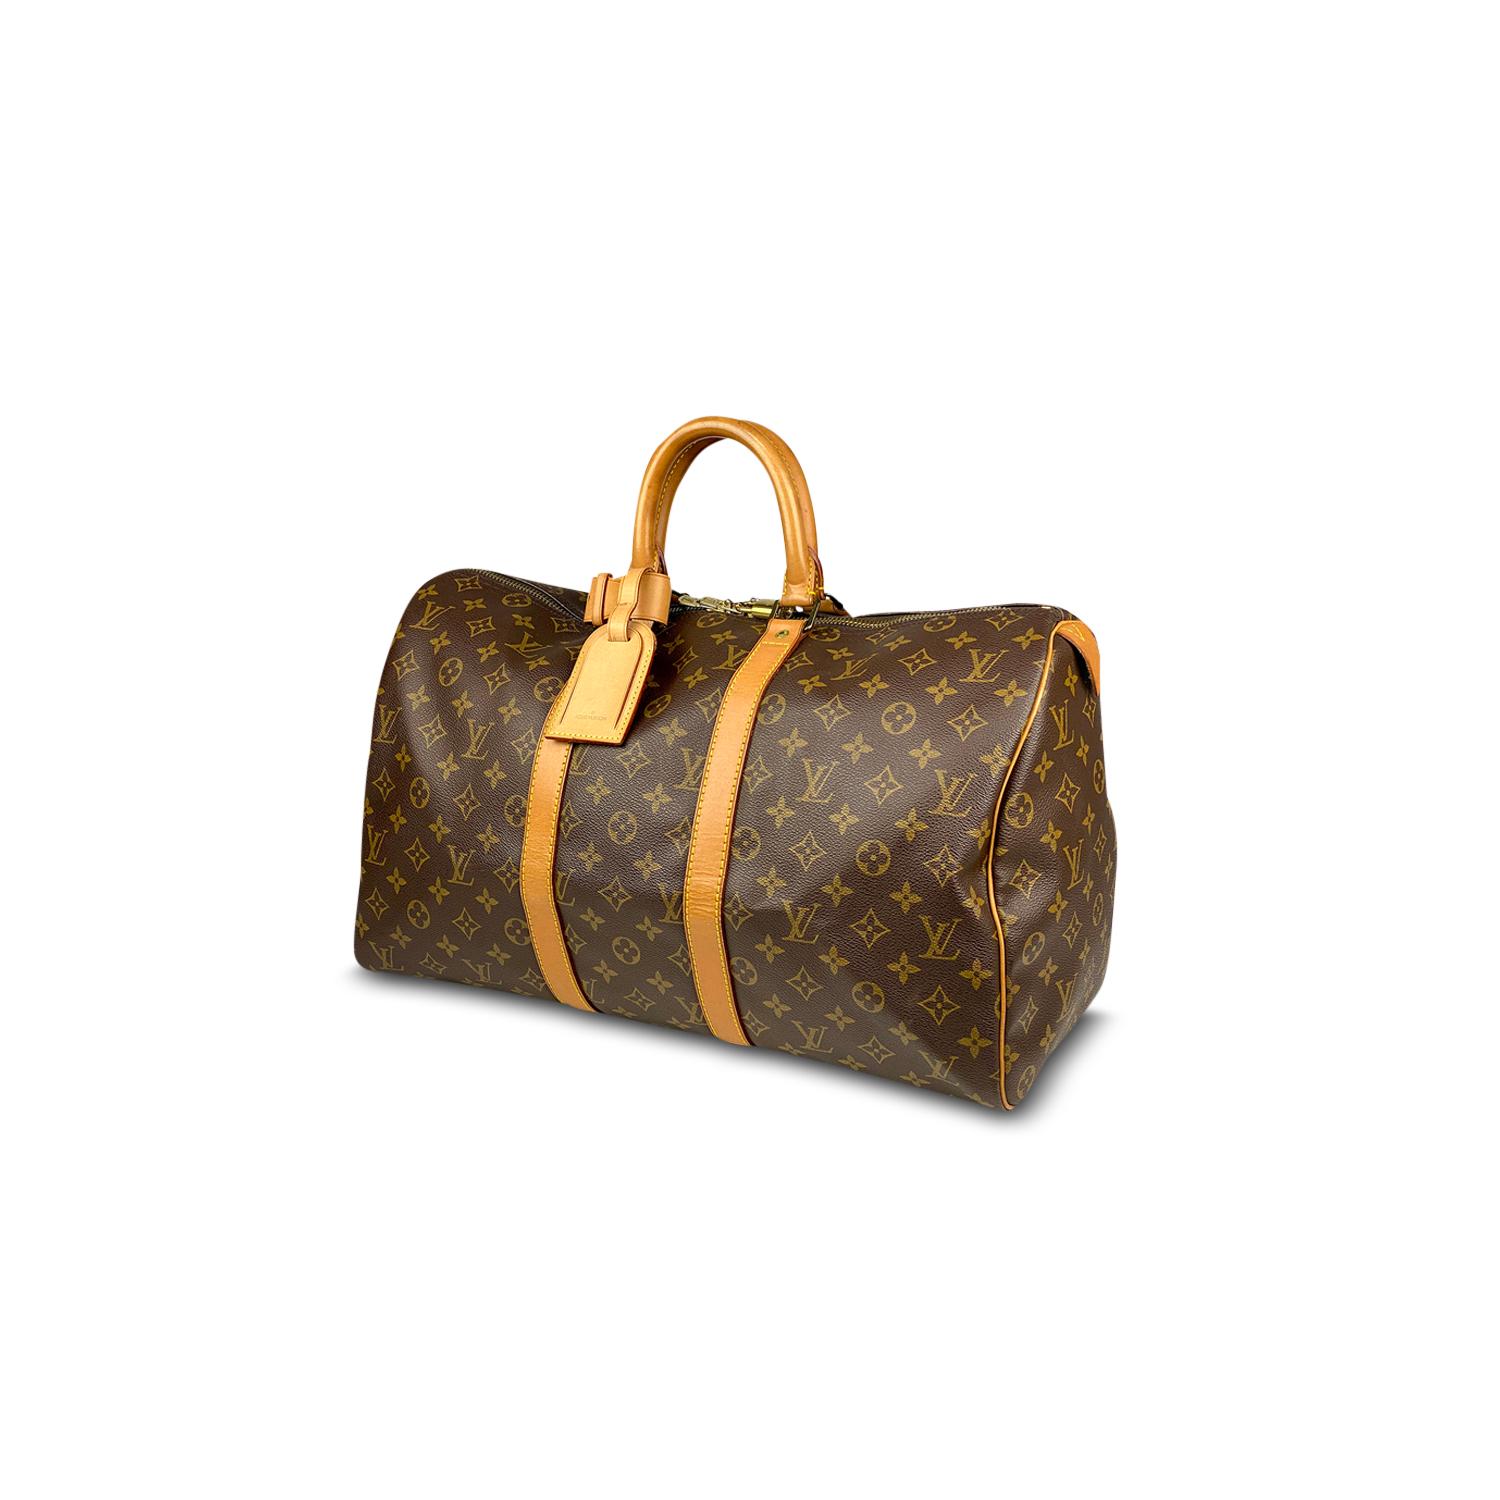 Brown and tan monogram coated canvas Louis Vuitton Keepall 45 with

– Brass hardware
– Tan vachetta leather trim
– Dual rolled top handles
– Tonal canvas lining and two-way zip closure at top

Overall Preloved Condition: Very Good
Exterior